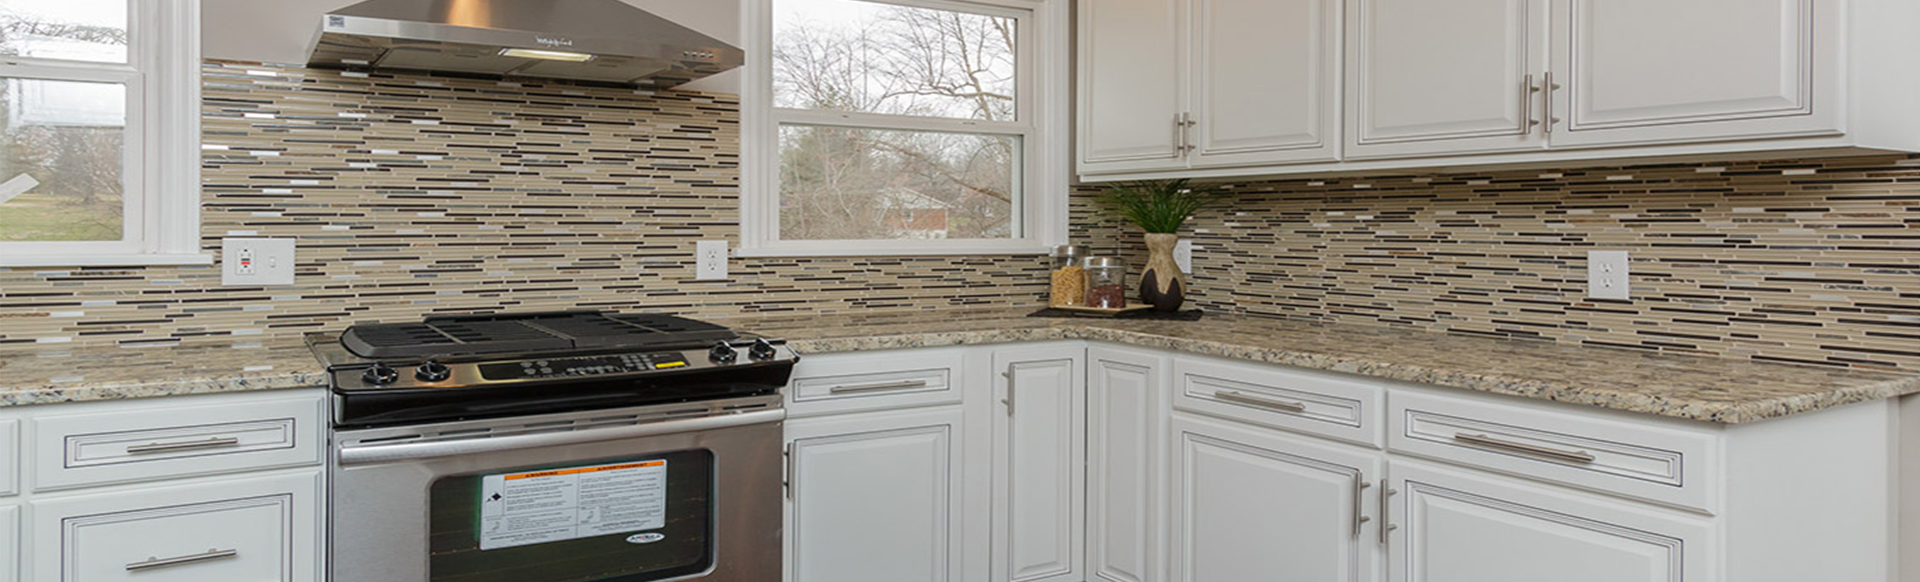 Affordable kitchen cabinets for multi-family homes.